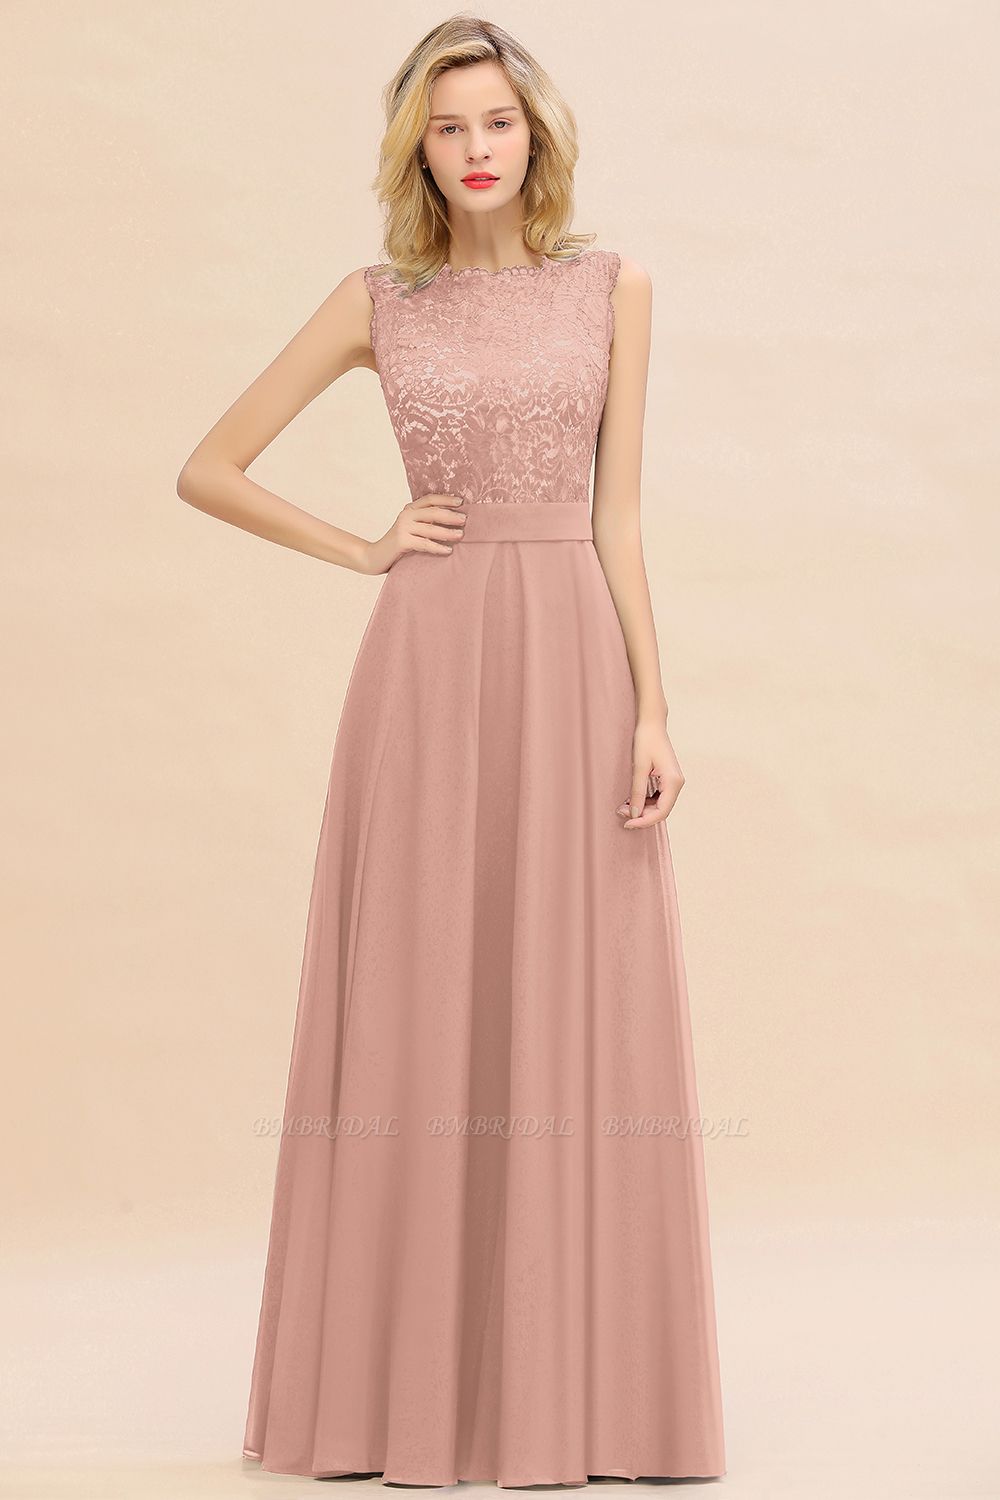 BMbridal Exquisite Scoop Chiffon Lace Bridesmaid Dresses with V-Back